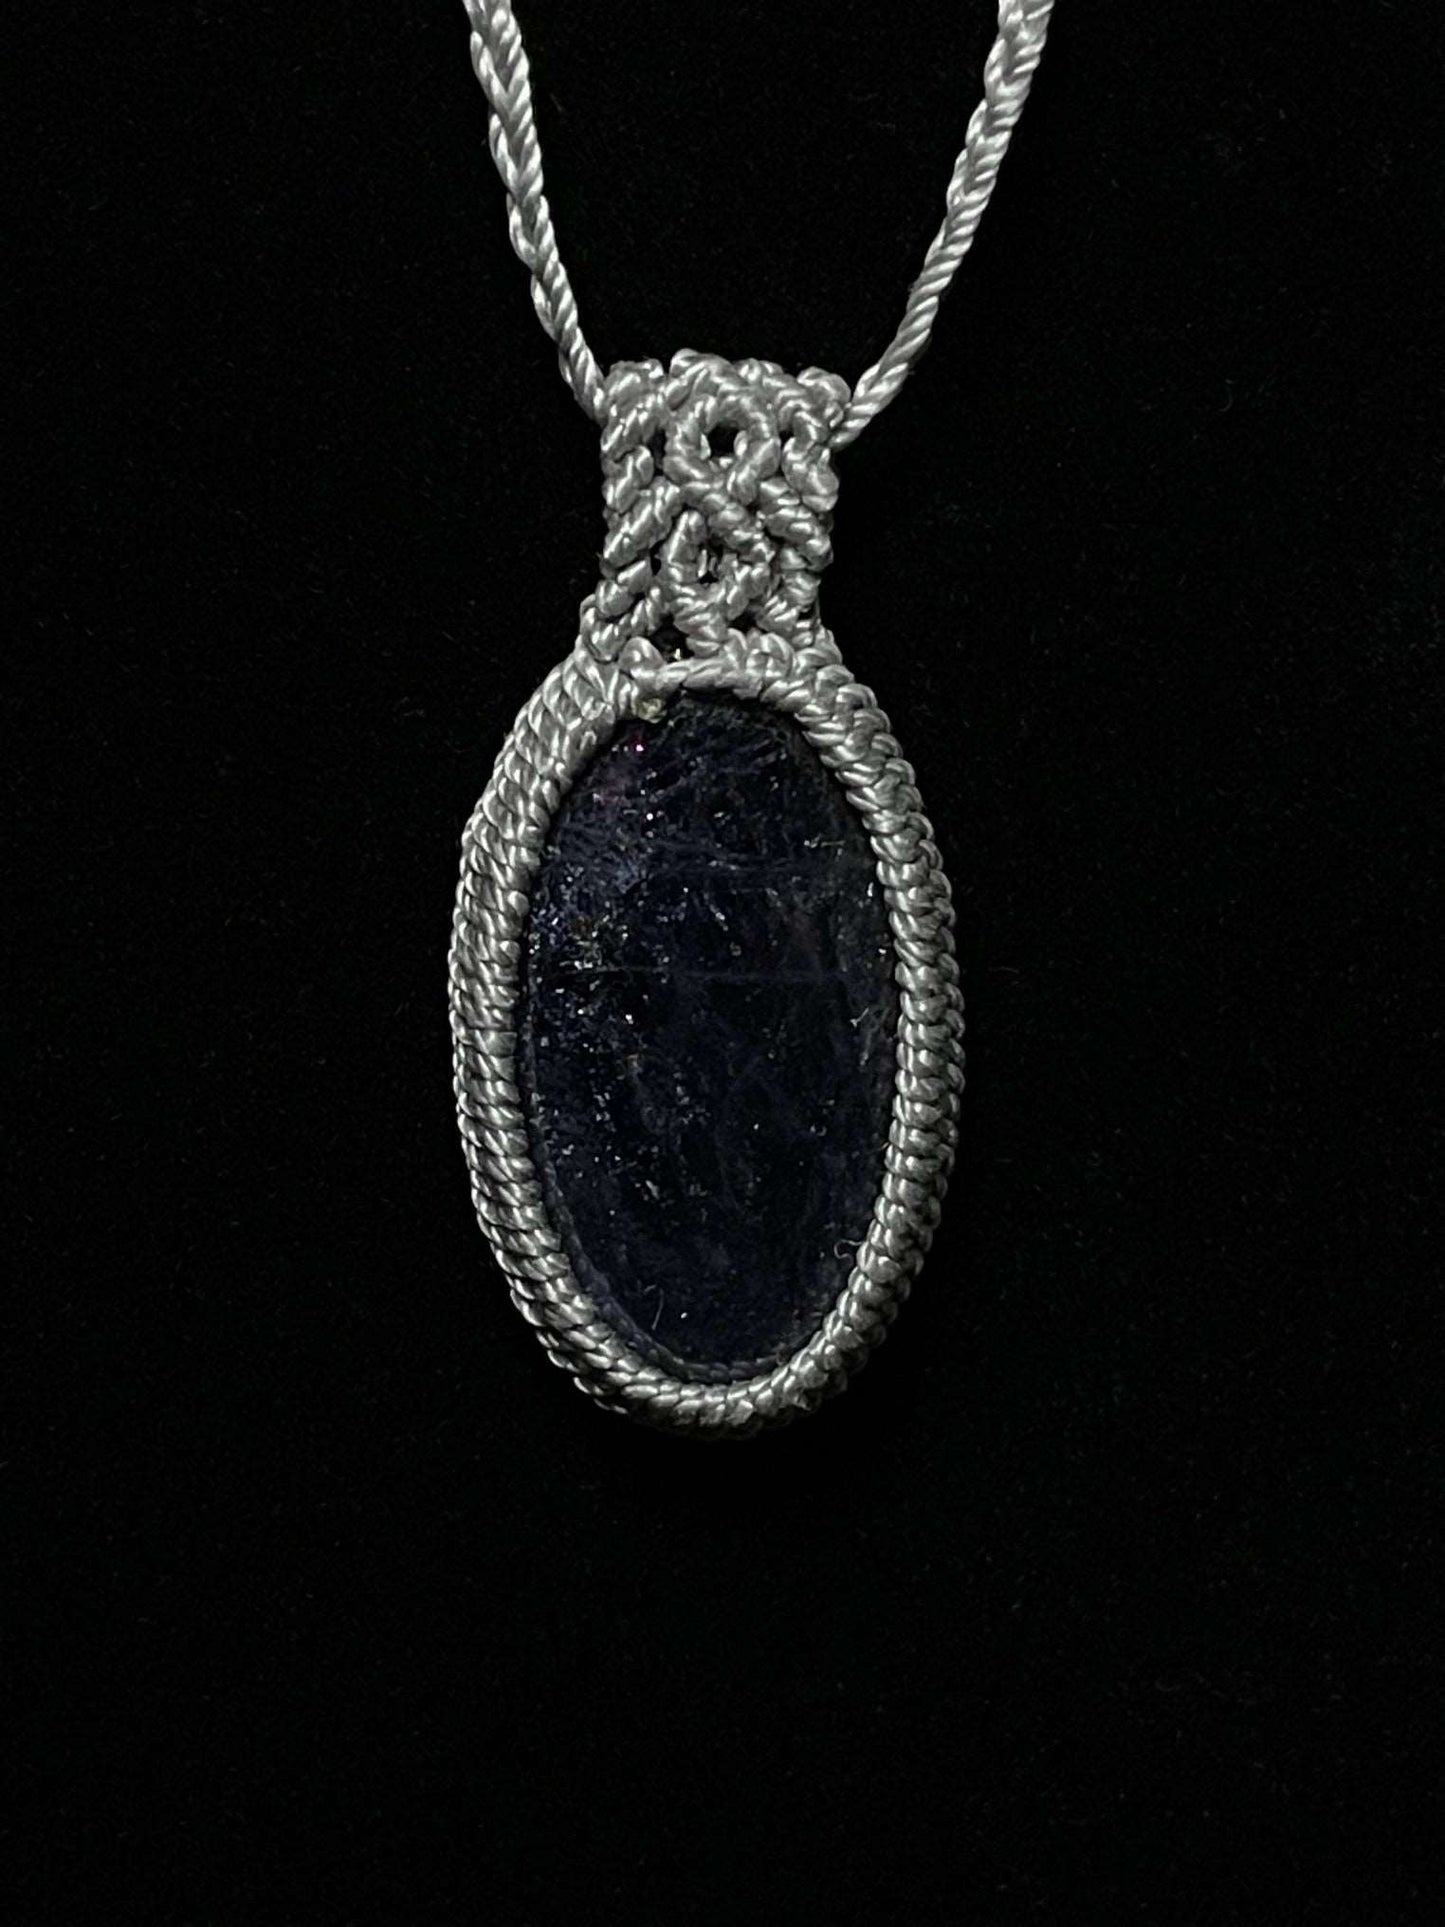 Pictured is an iolite cabochon wrapped in macrame thread. A gothic book and flowers are nearby.